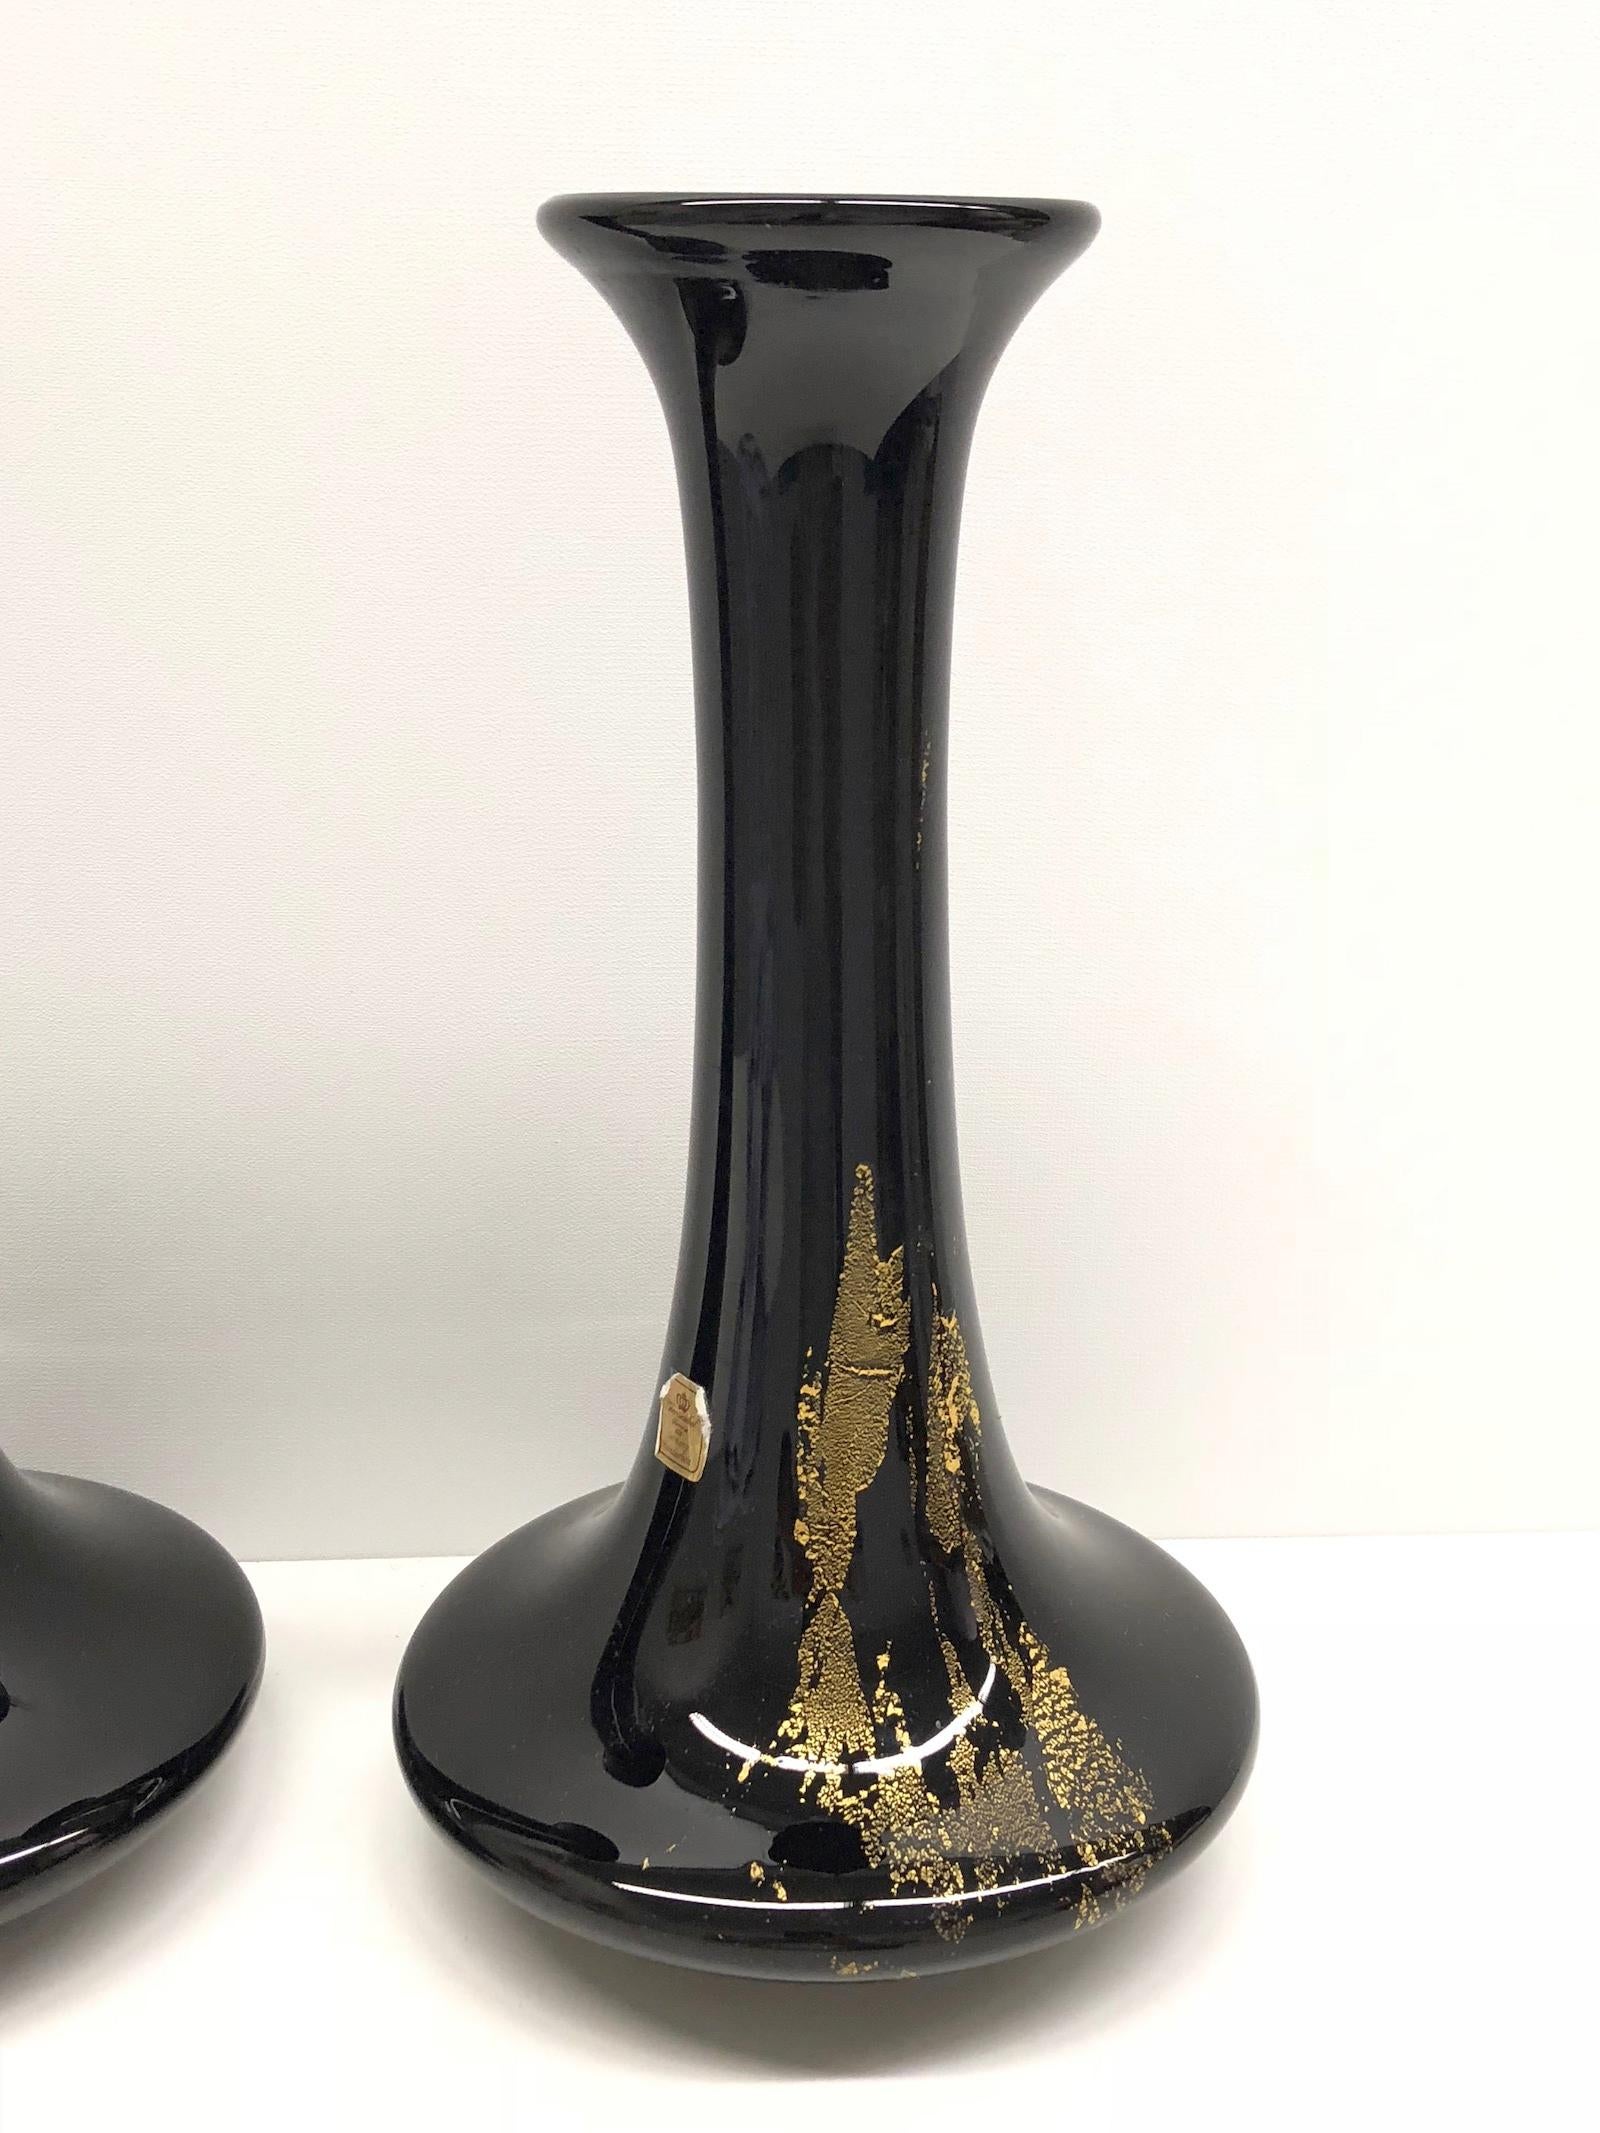 A pair of stylish well shaped black glass vase with two random pattern gold sheet on-lays, under-base with acid etched crown mark and one with the original paper label. Vase are in very good condition with no chips, cracks, or flea bites.